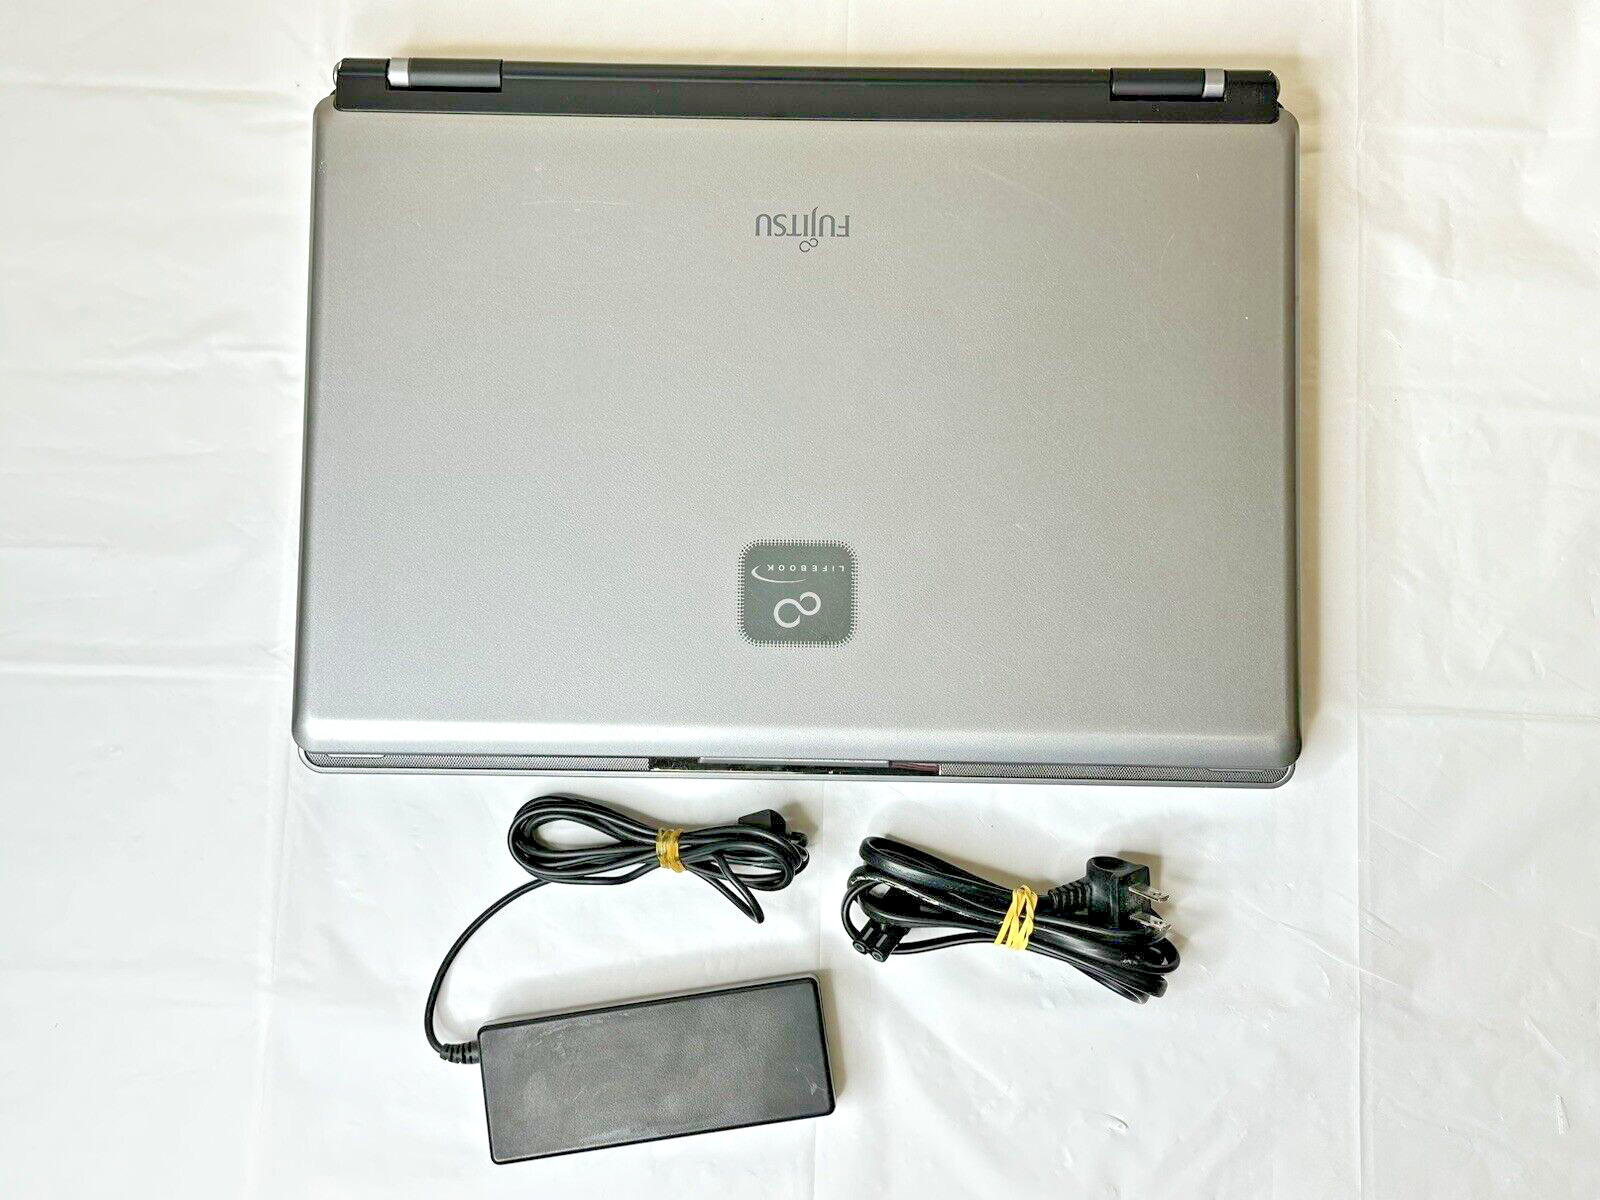 Fujitsu Laptop N6210 Pentium M 1.86 GHz With Charger